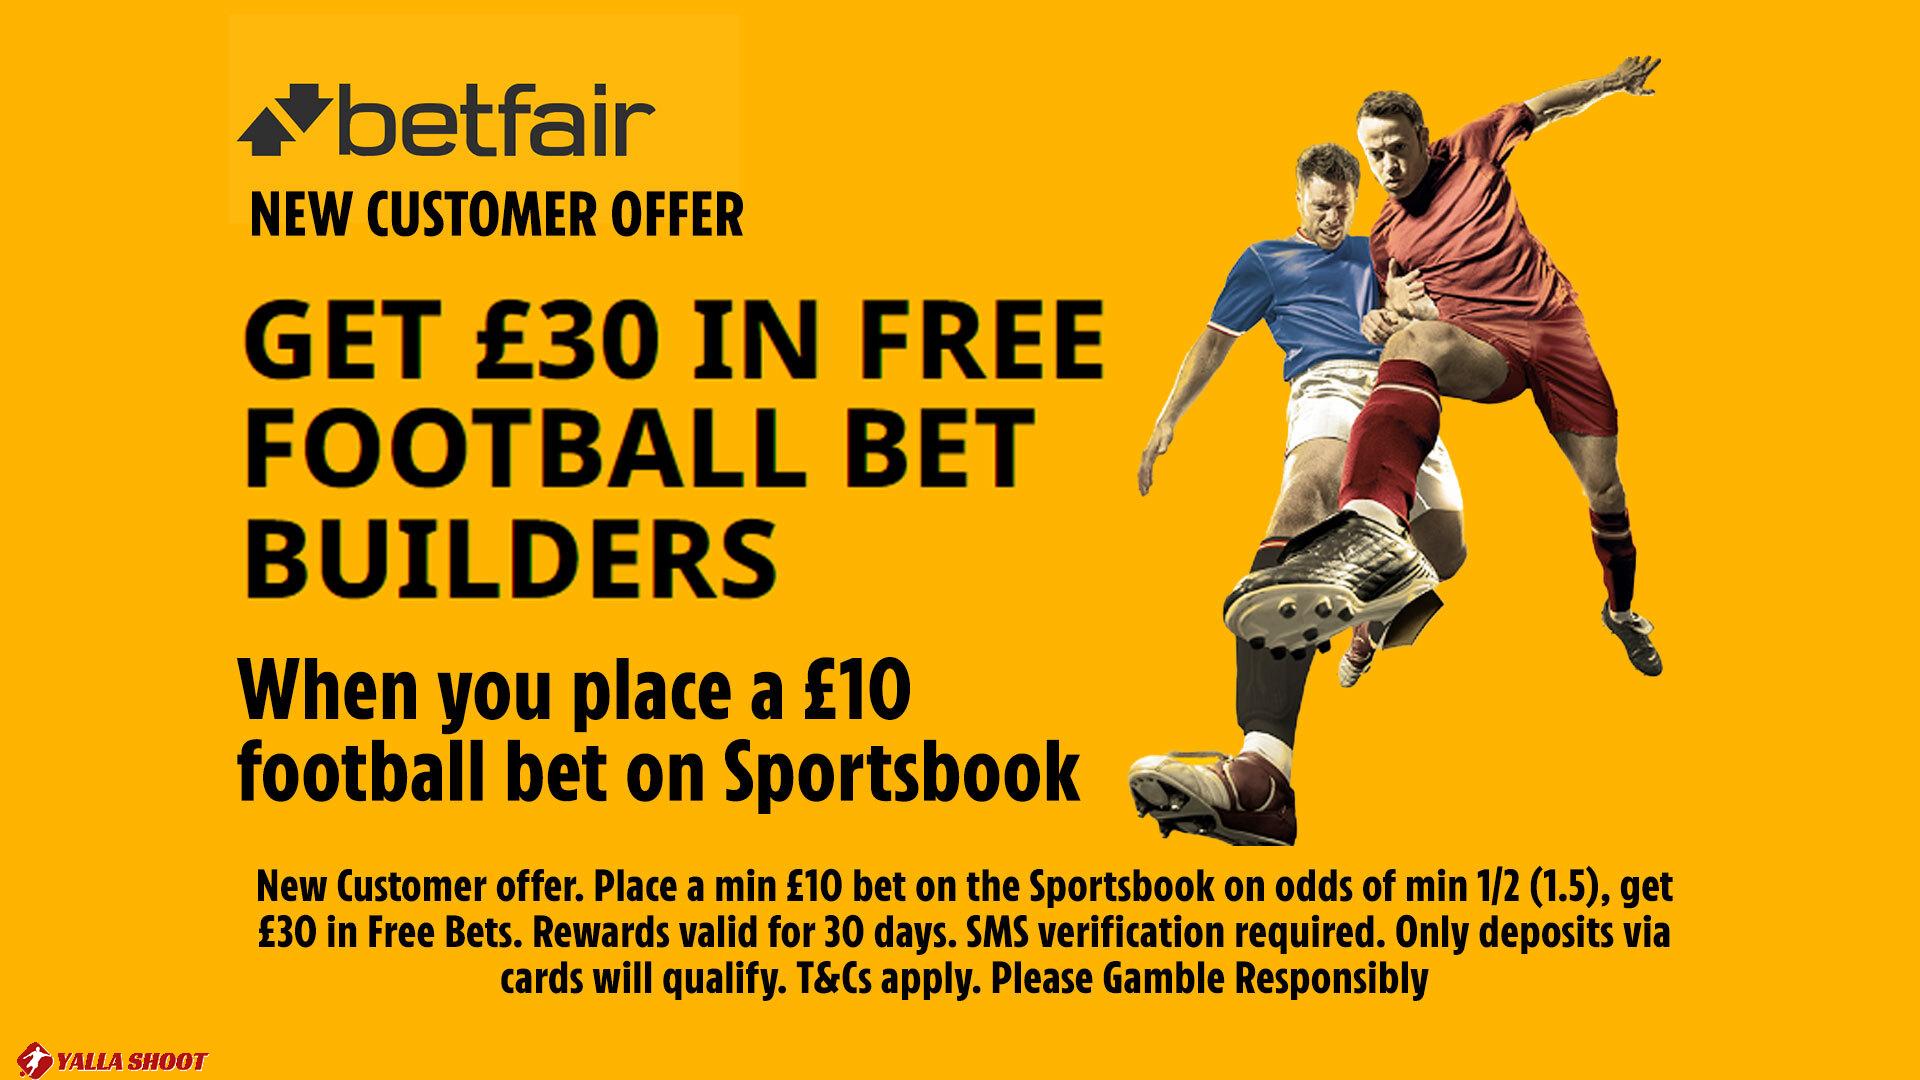 Sign-up offer: Get £30 in free football bet builders with Betfair - 18+ T&Cs apply